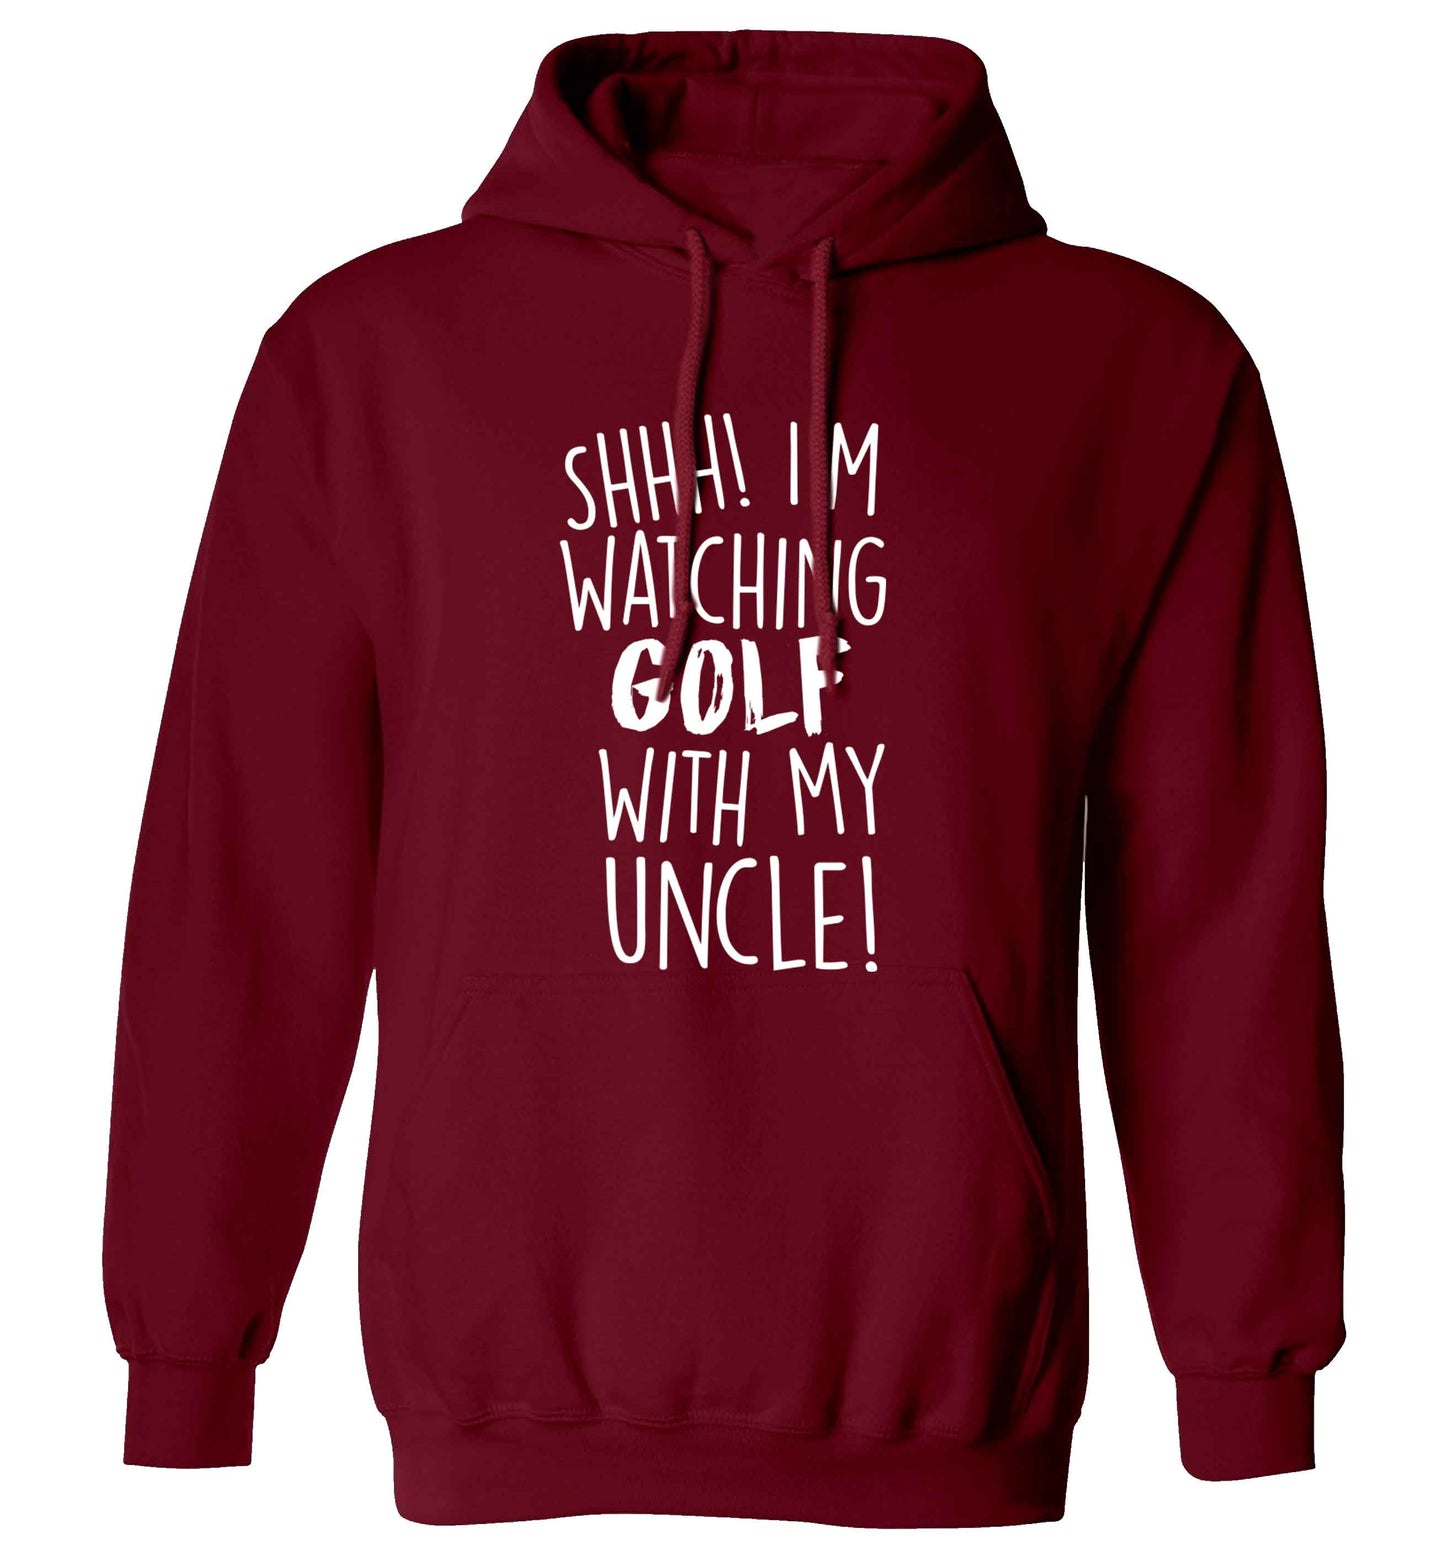 Shh I'm watching golf with my uncle adults unisex maroon hoodie 2XL